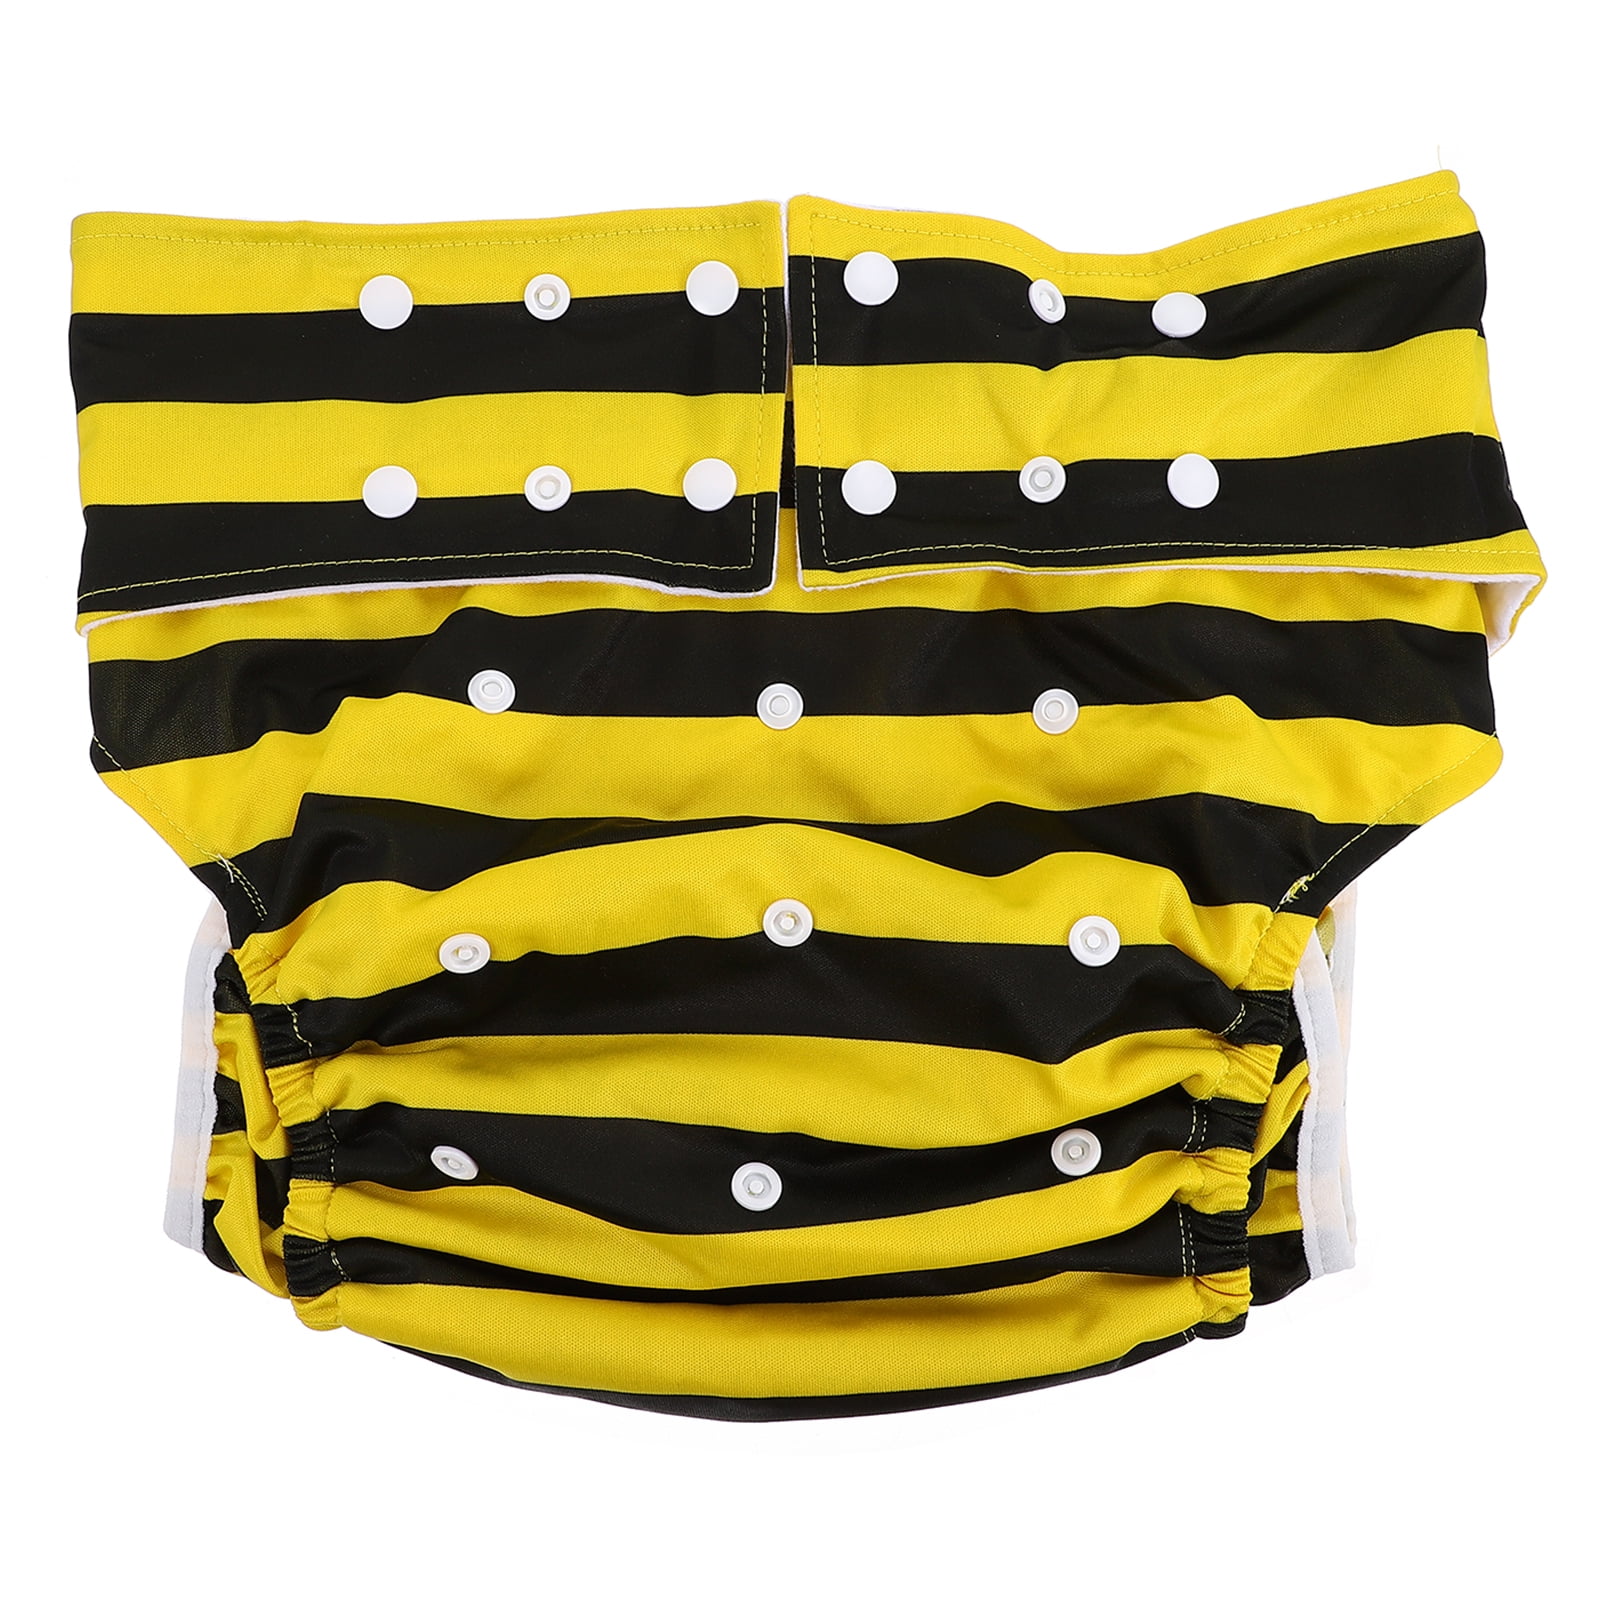 Black And Yellow Sexy Latex Diaper With Buttons Front Loosely